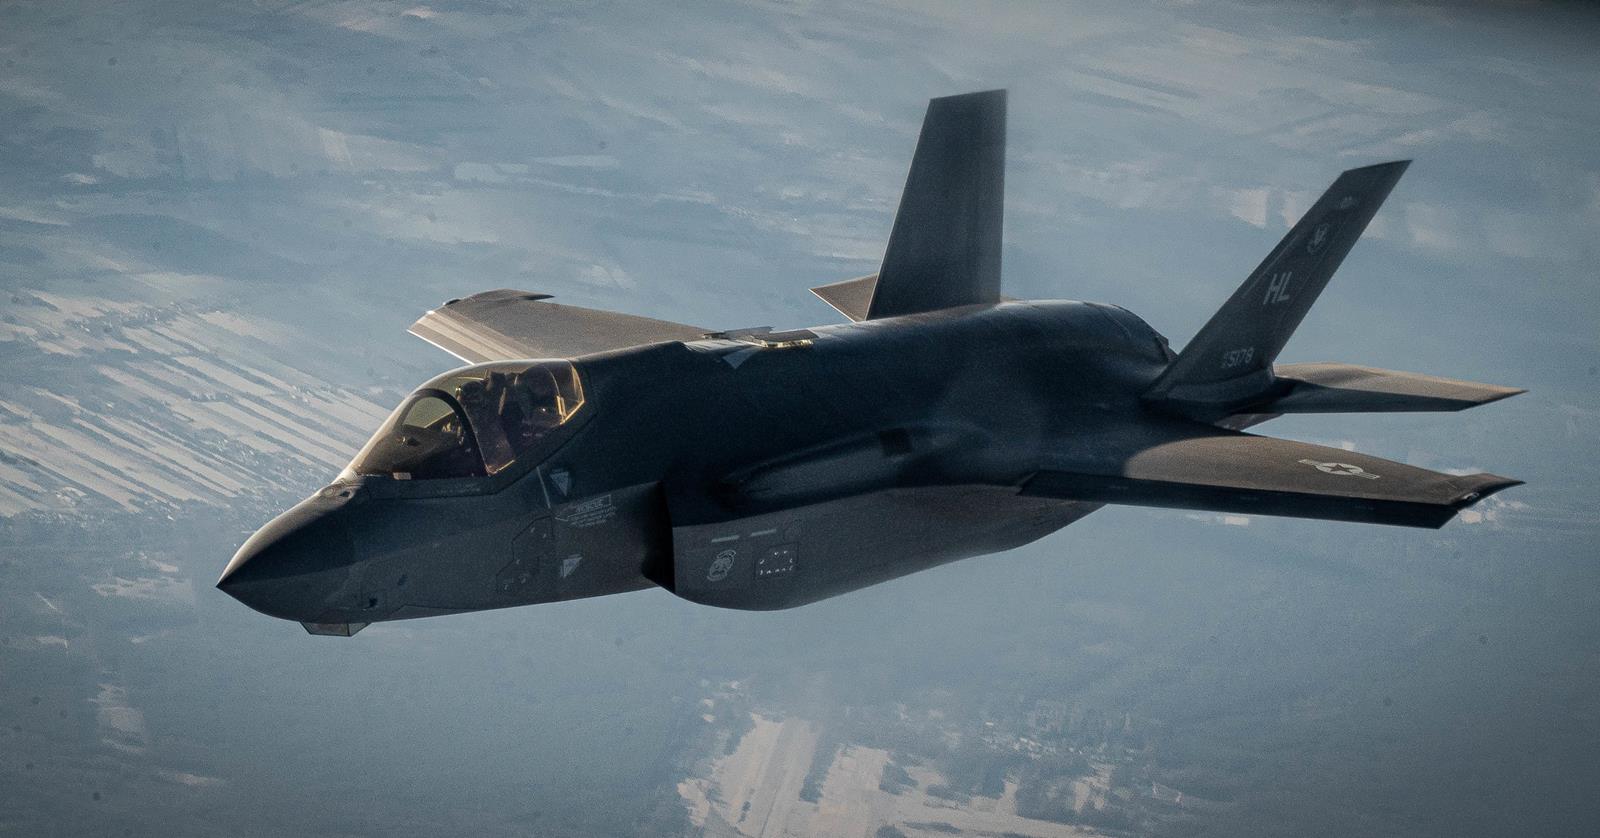 American F-35 fighters fly over Poland in full stealth mode.  They send out a warning